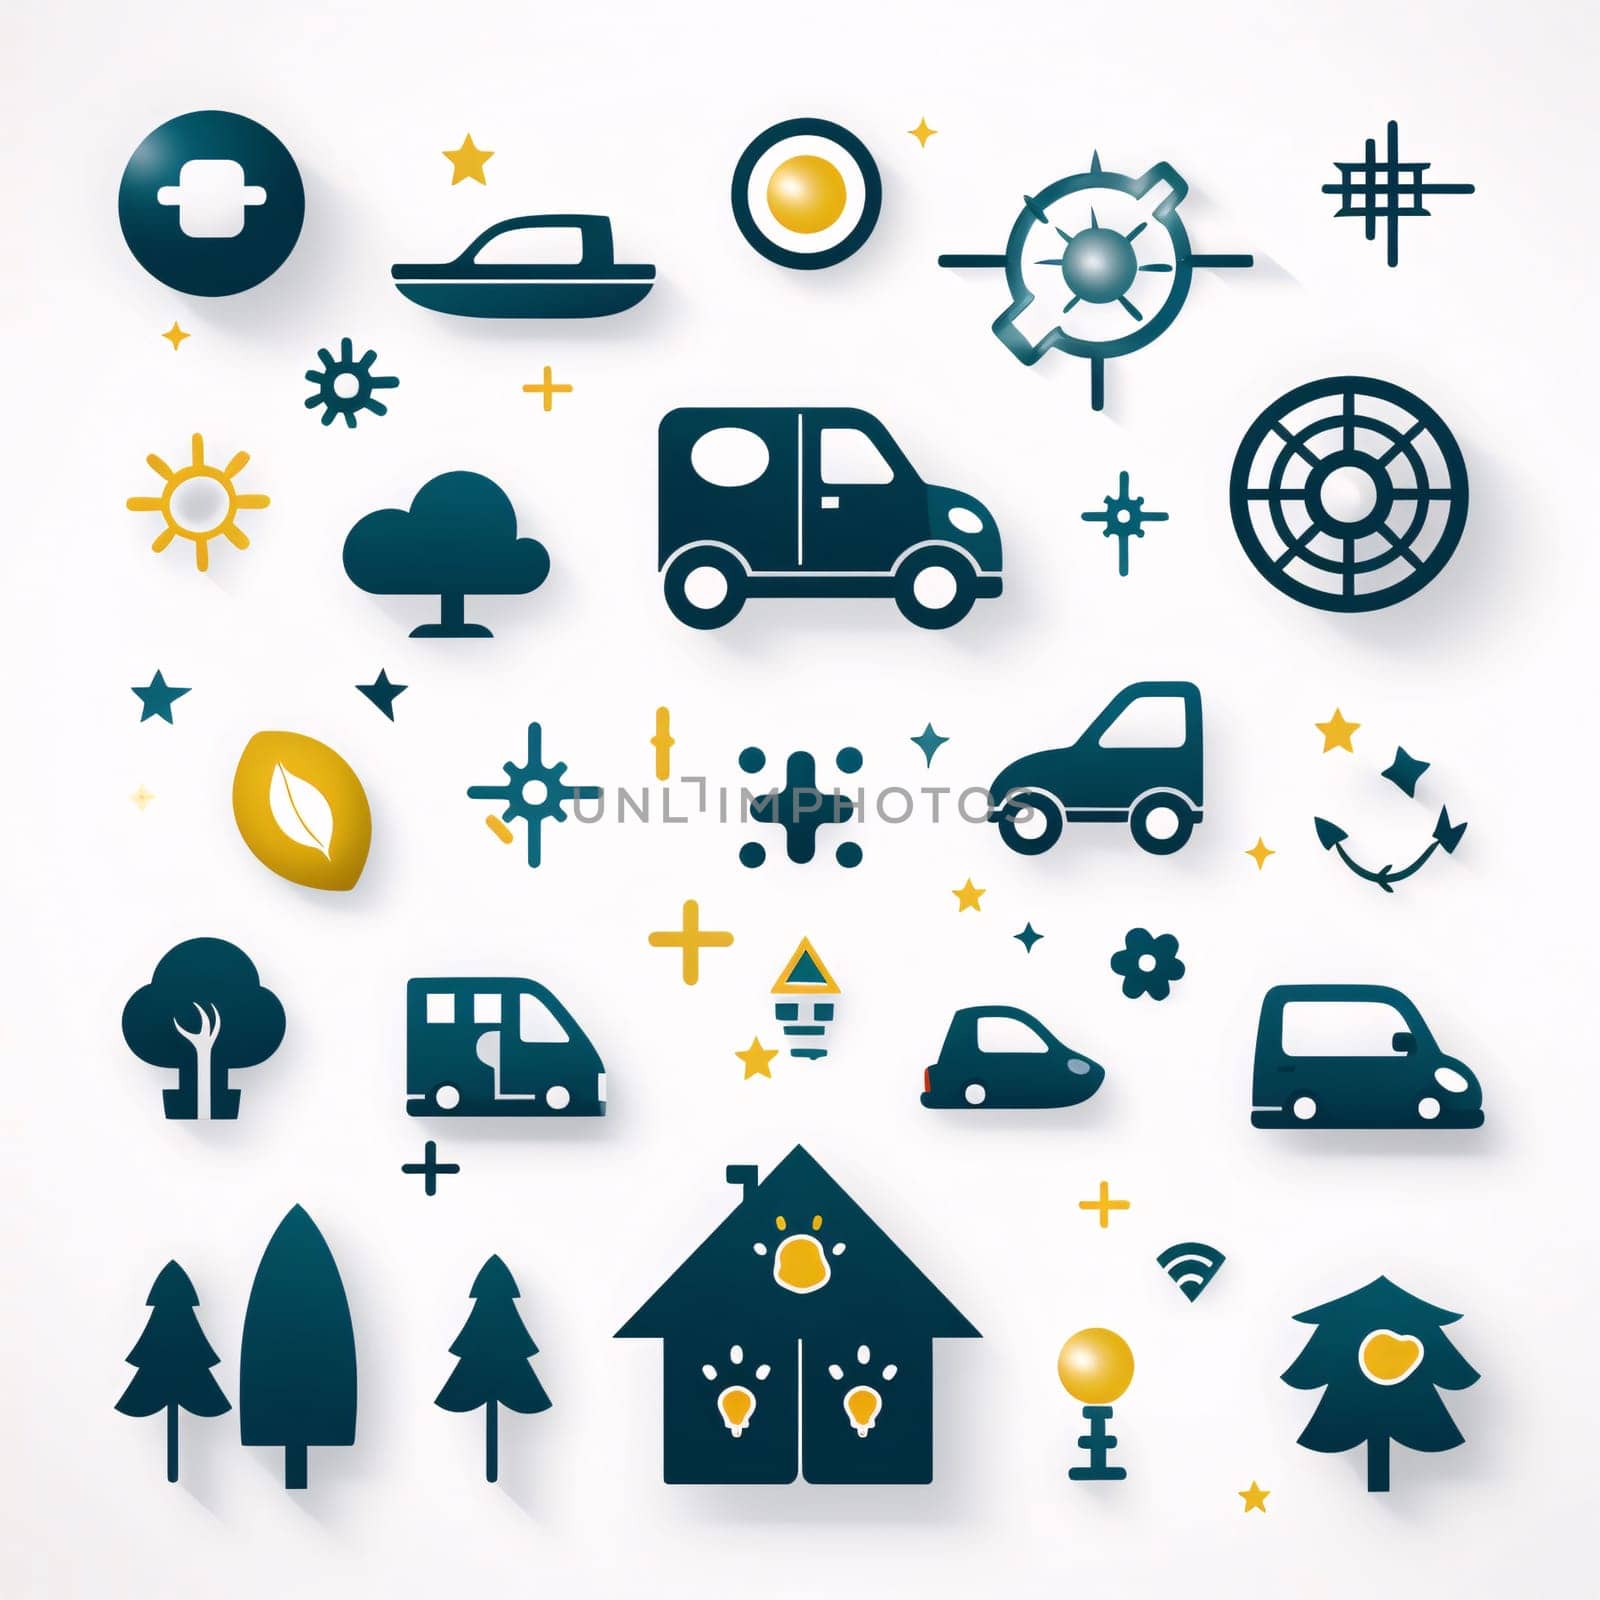 New icons collection: Set of vector icons with different types of transport on white background.